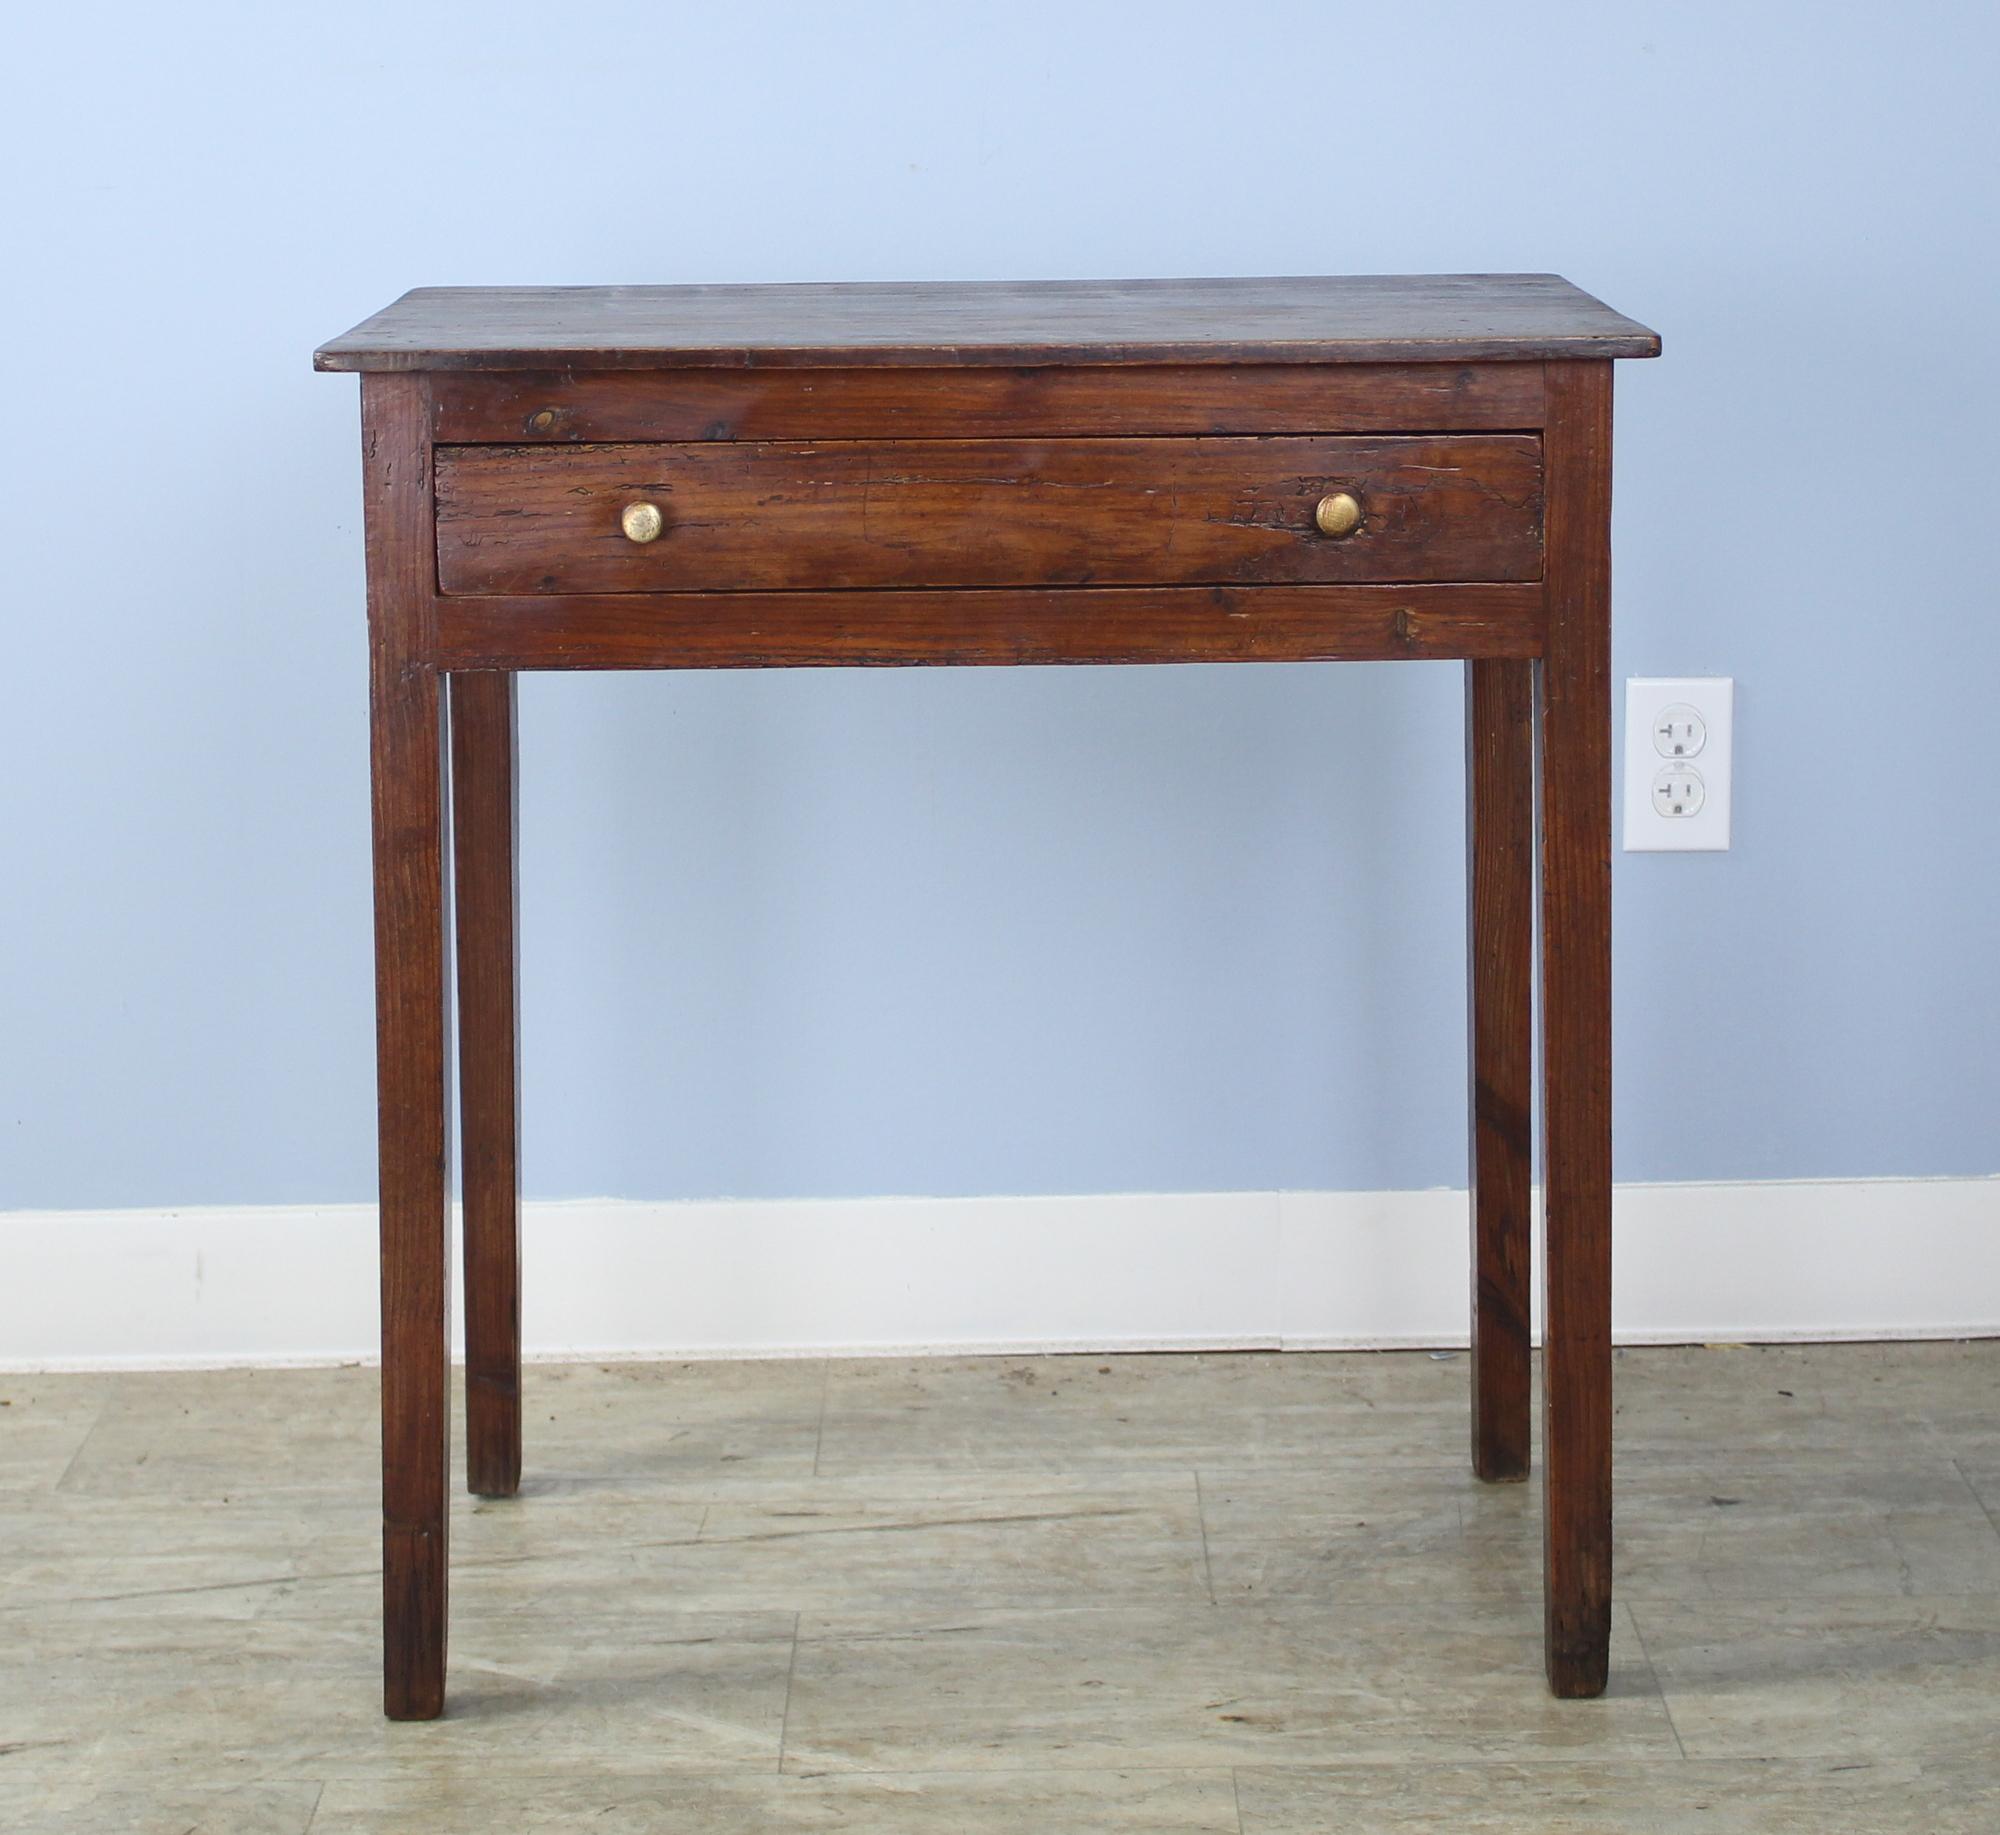 A fine Welsh period oak side table with original brass knobs and a single drawer. Good color and patina with a delicate thin top and nicely tapered legs. Would make an excellent lamp or occasional table.